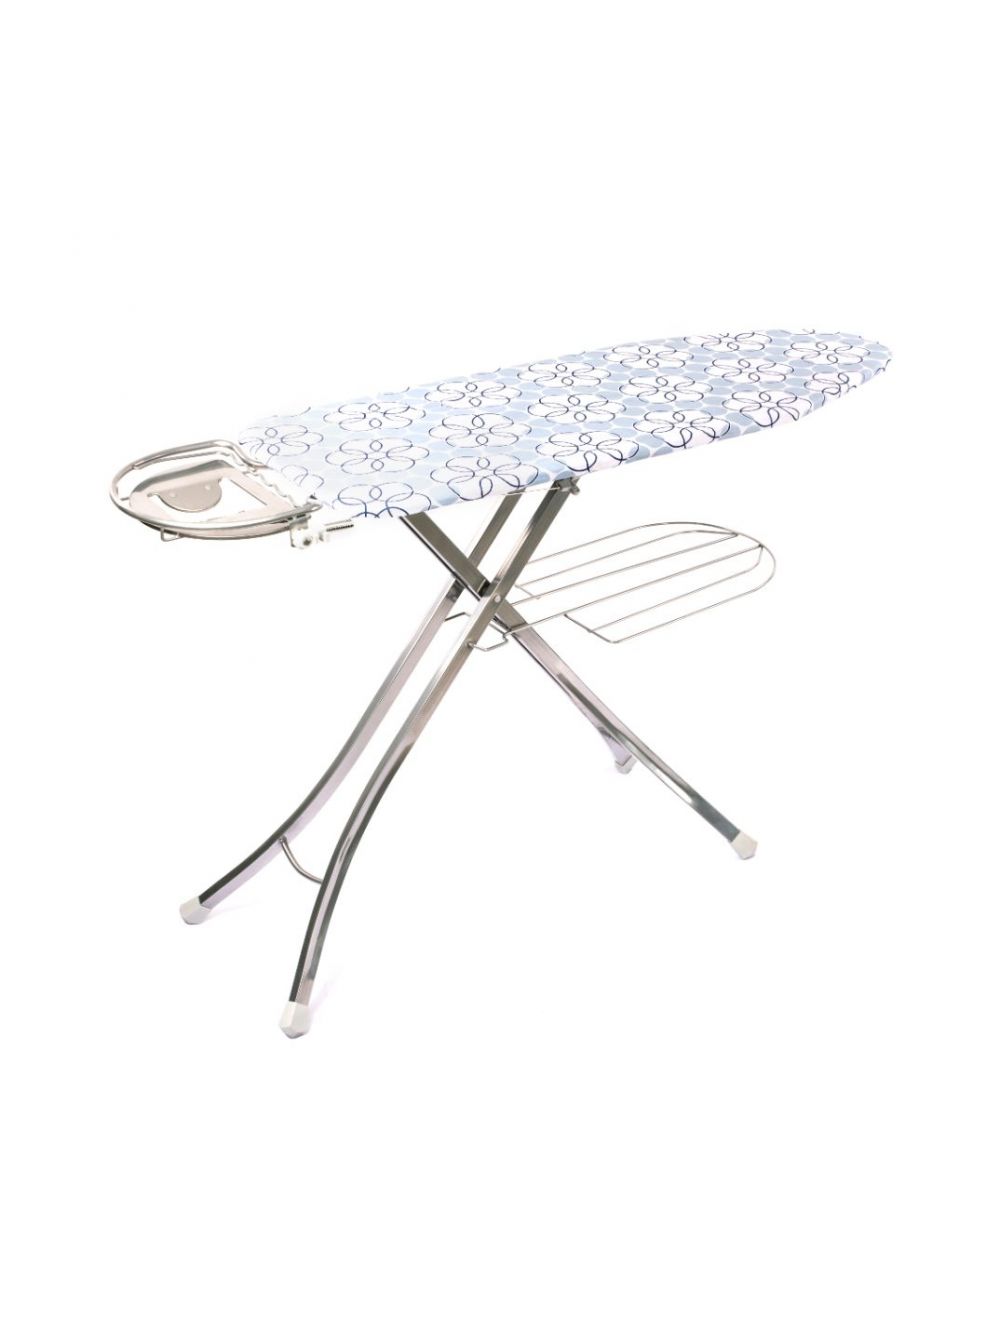 Royalford RF365IBL 127x46 cm Ironing Board with Steam Iron Rest